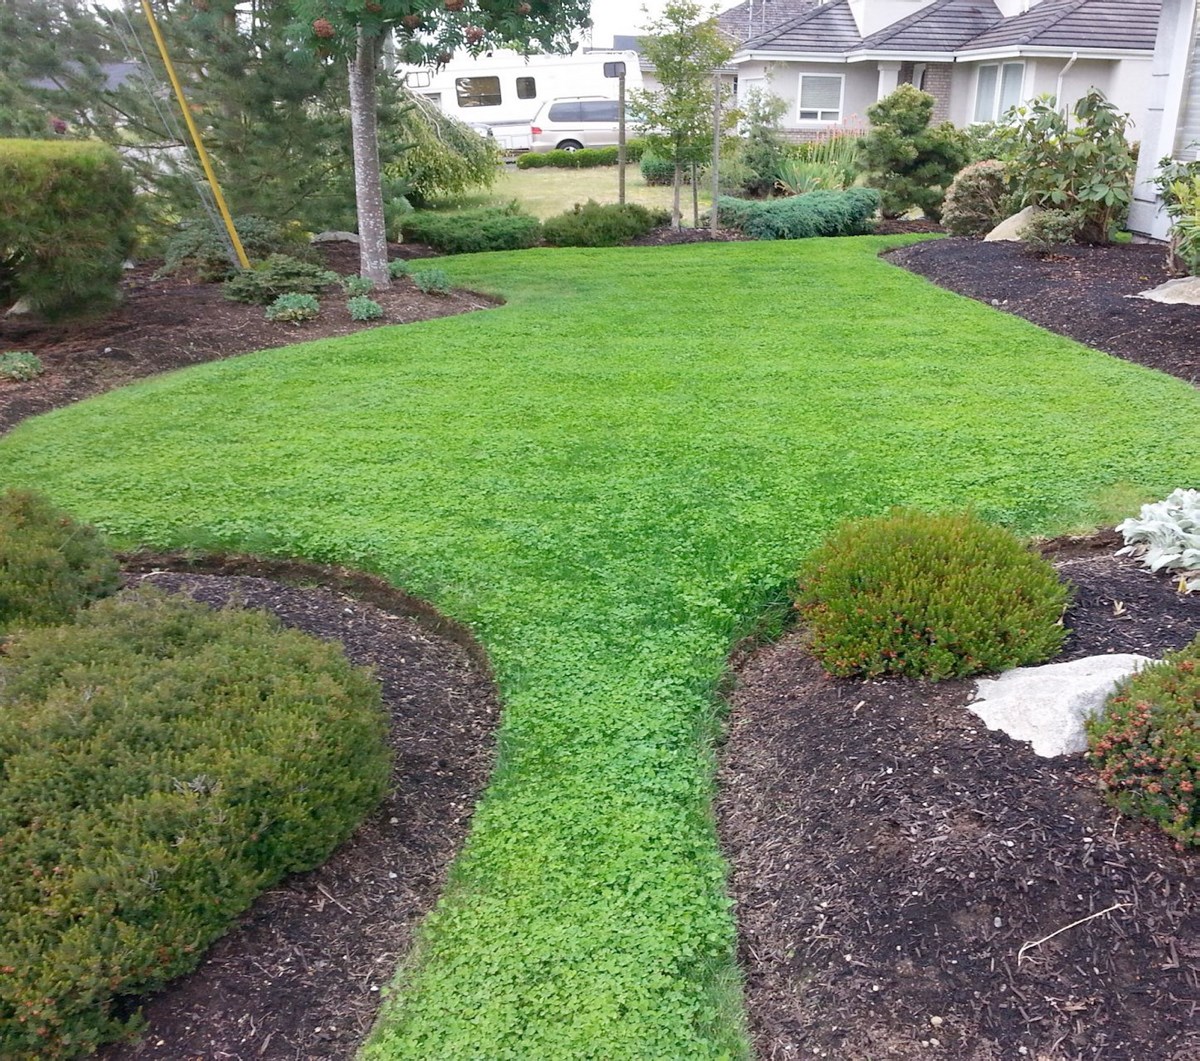 Helen Chesnut: Eco friendly micro clover lawns can attract deer